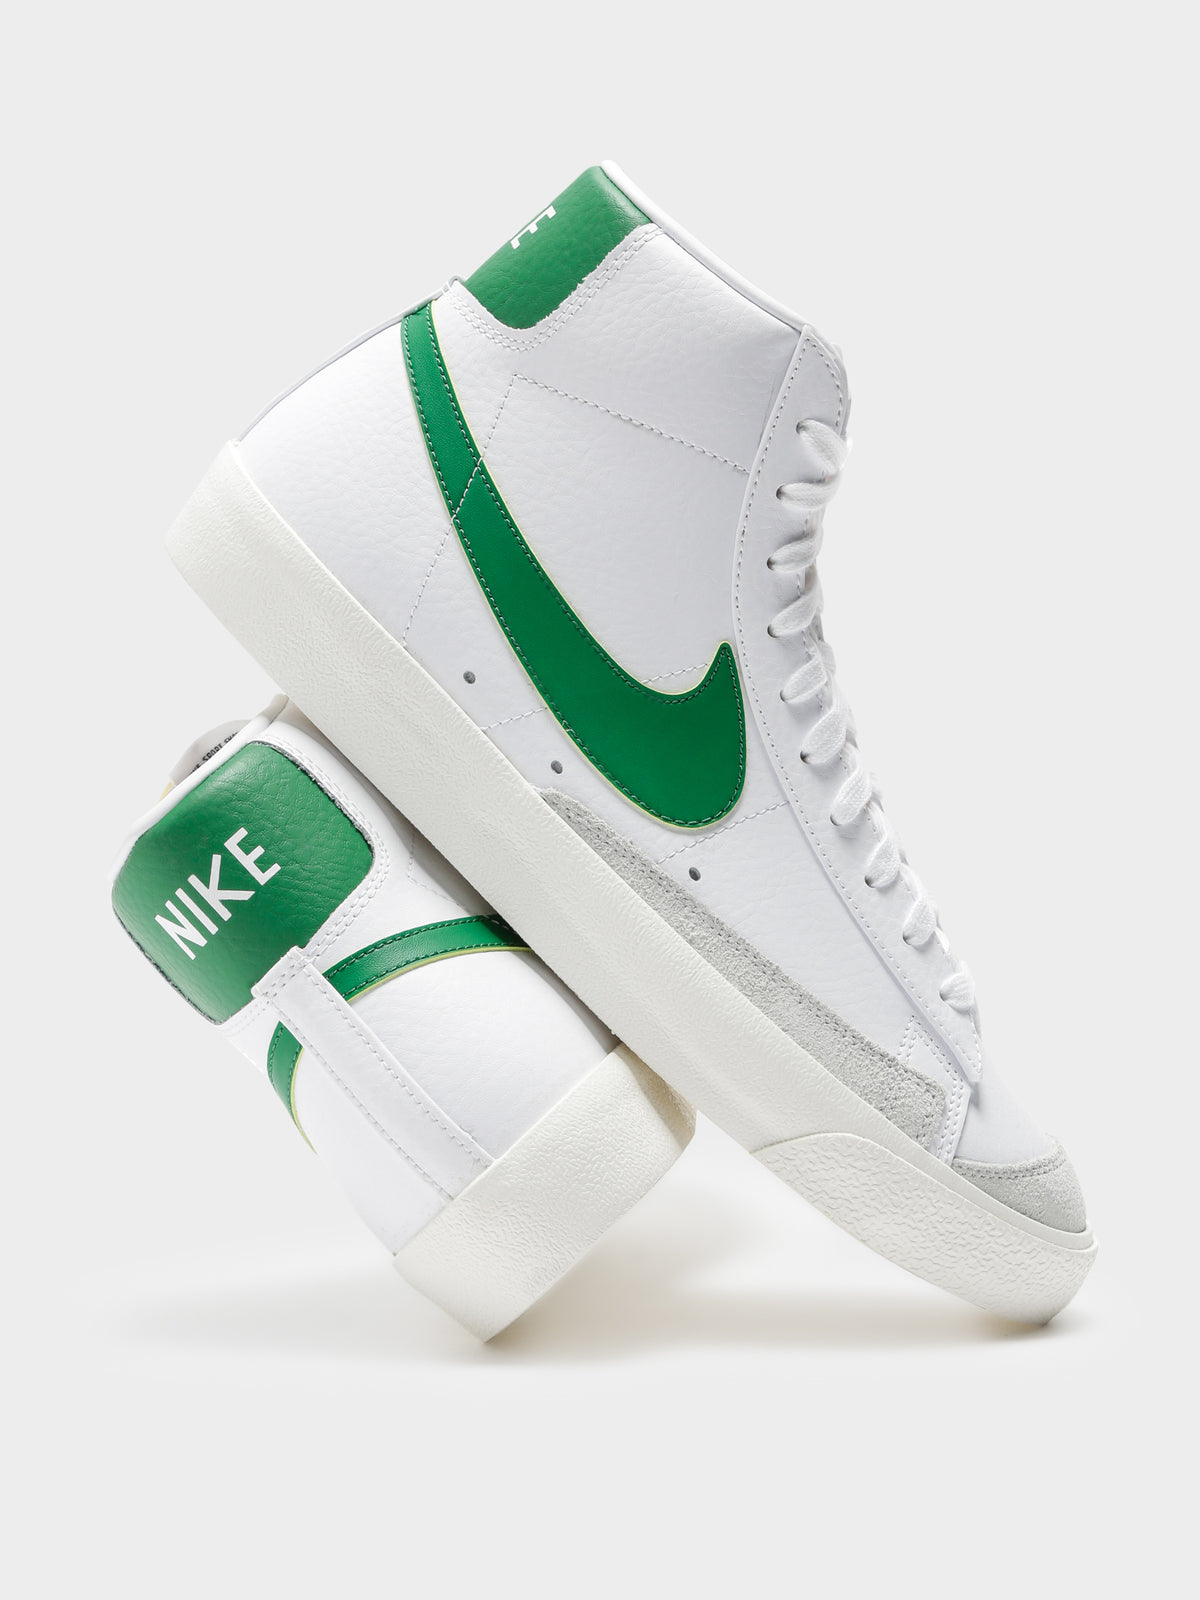 Mens Blazer Mid 77 High Top Sneakers in Green &amp; White